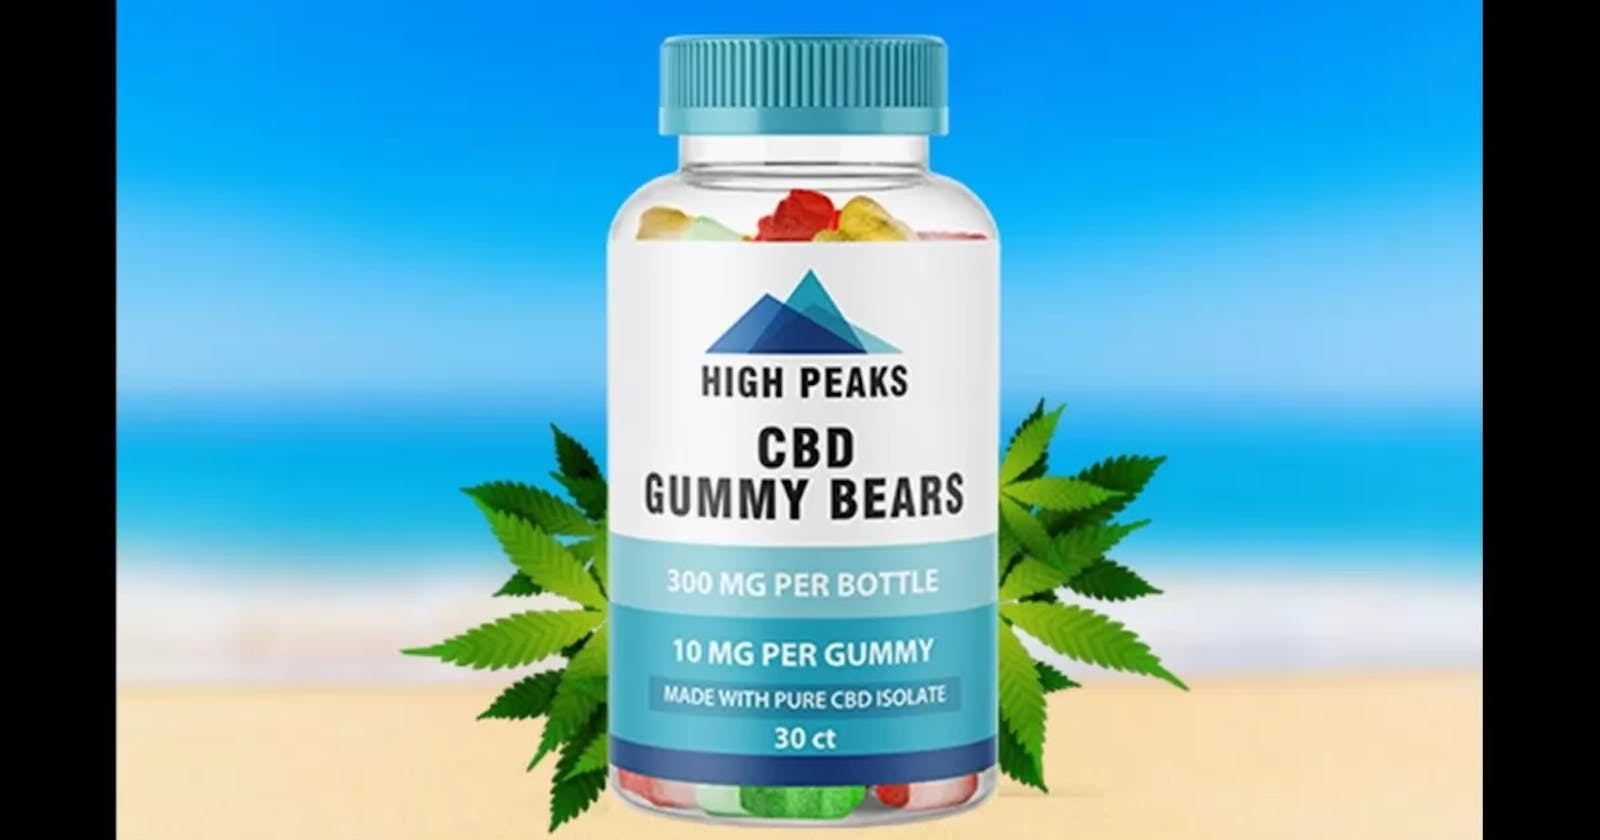 High Peaks CBD Gummies REAL OR HOAX - Shocking Side Effects & Customer Complaints